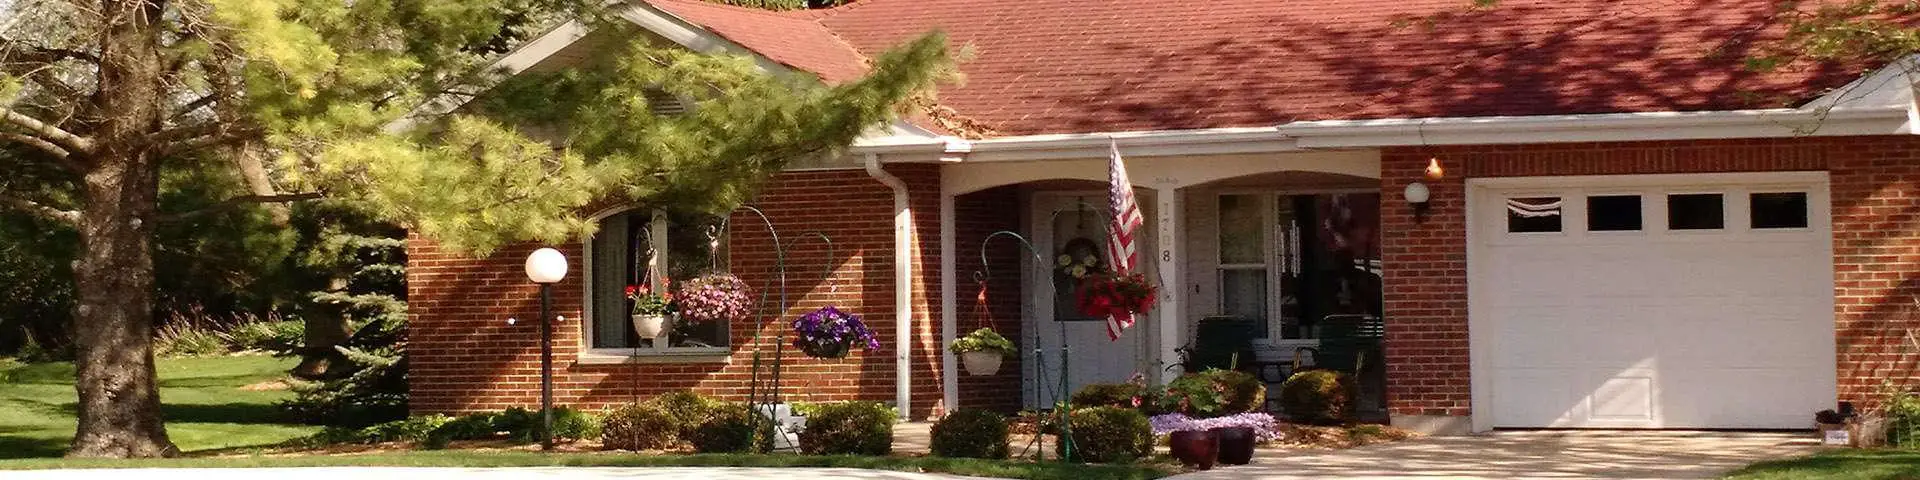 Photo of Park View Home, Assisted Living, Nursing Home, Independent Living, CCRC, Freeport, IL 3